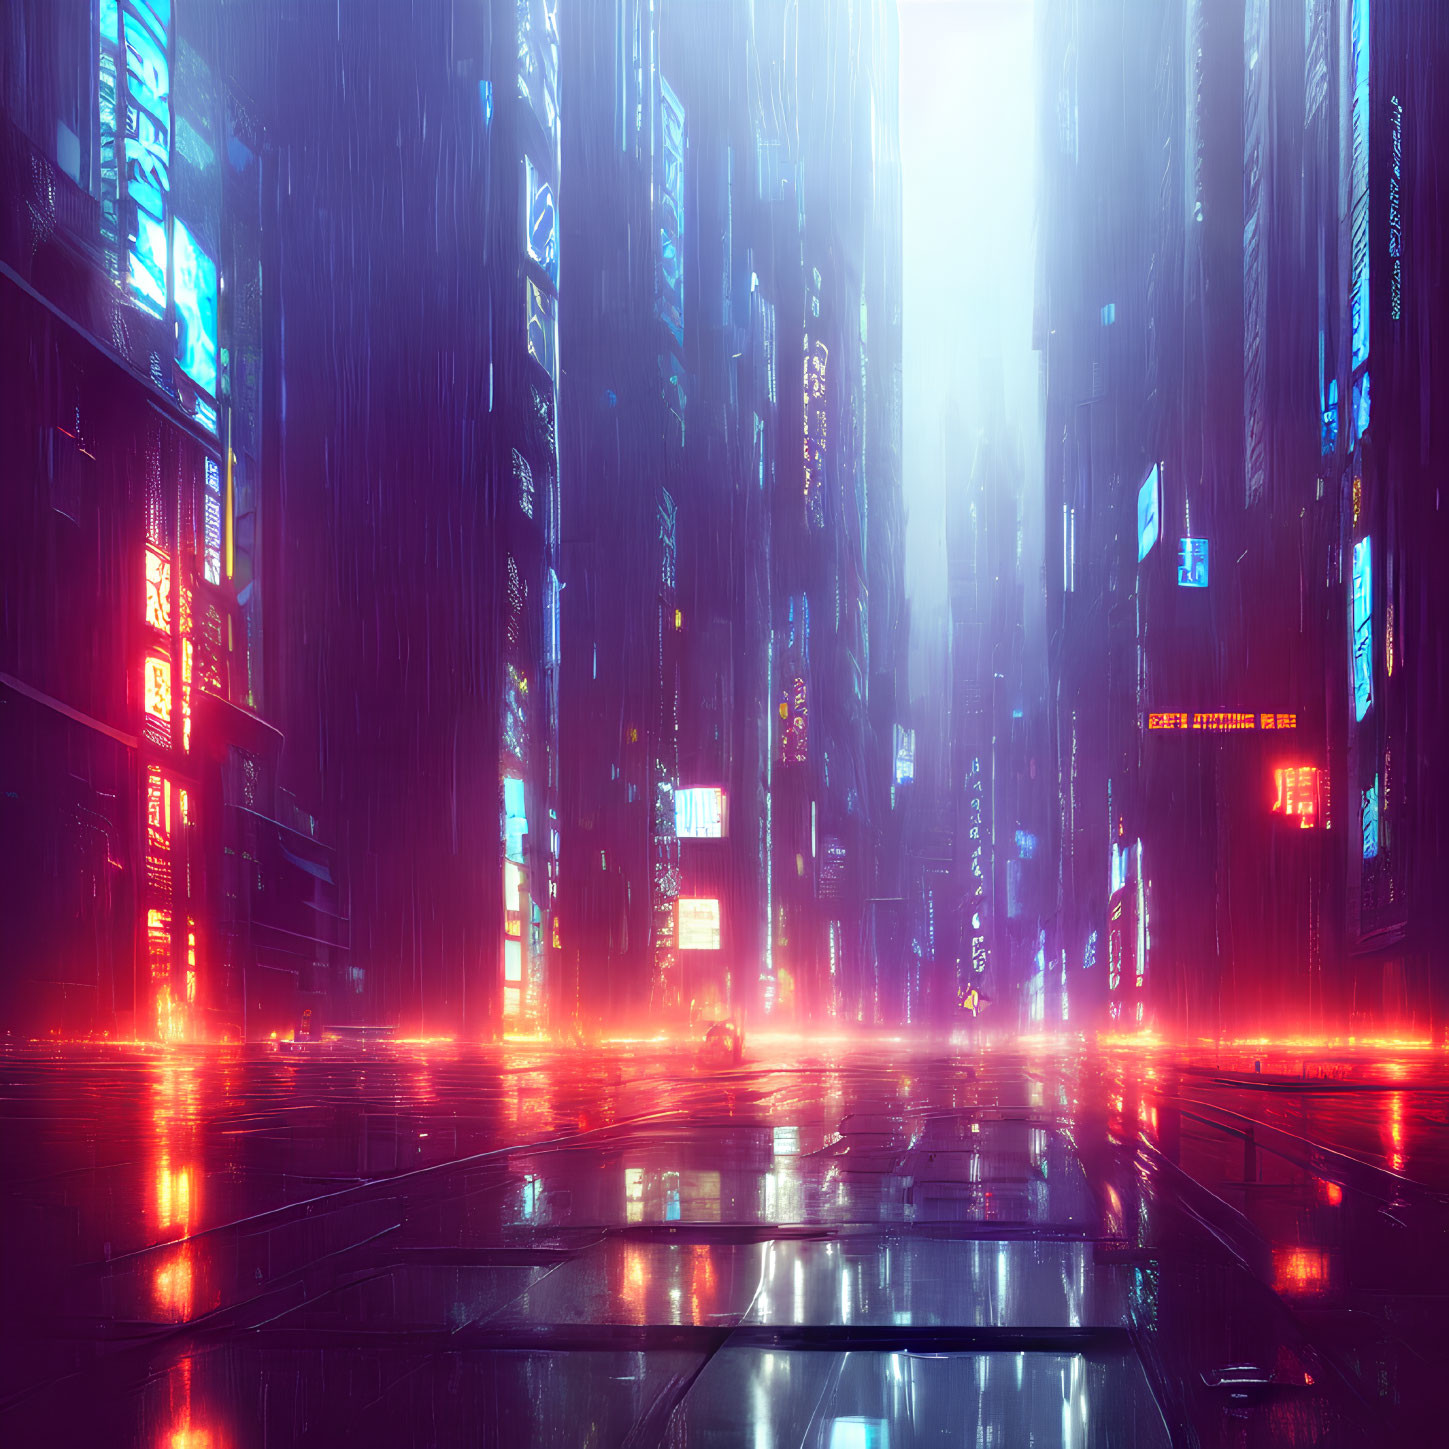 Neon-lit futuristic city street in a rain-drenched ambiance